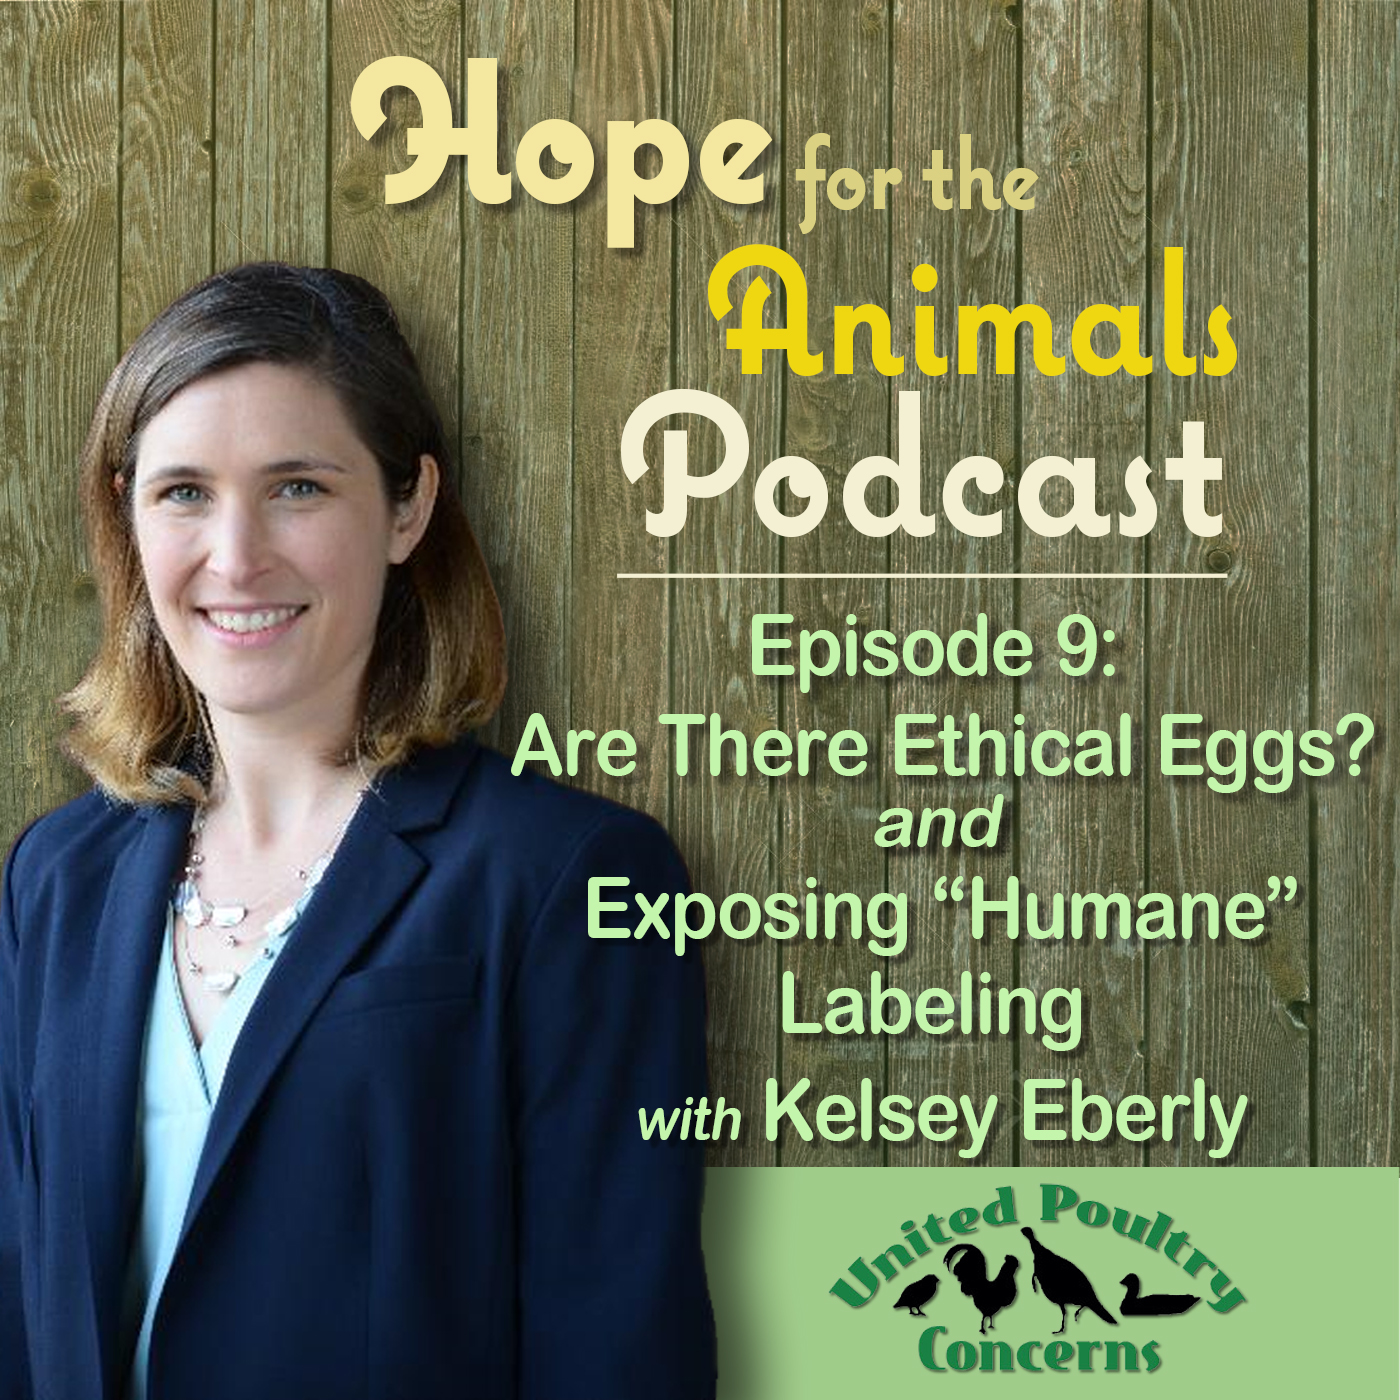 Episode 9: Are There Ethical Eggs? and Exposing “Humane” Labeling with Kelsey Eberly